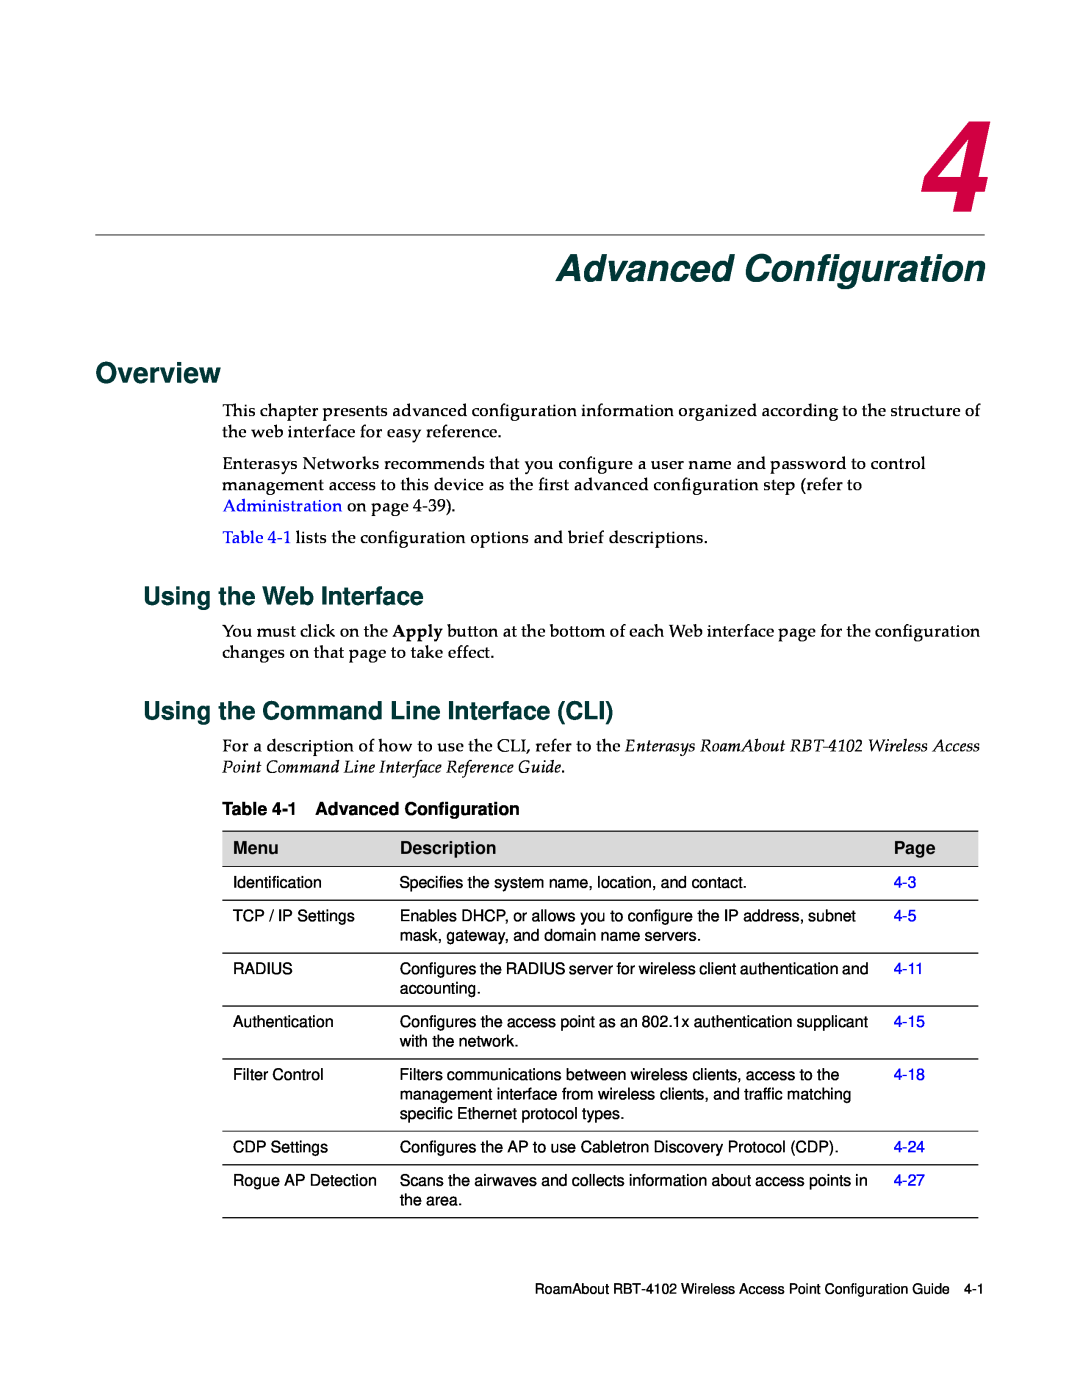 Enterasys Networks RBT-4102 Advanced Configuration, Using the Web Interface, Using the Command Line Interface CLI, Menu 